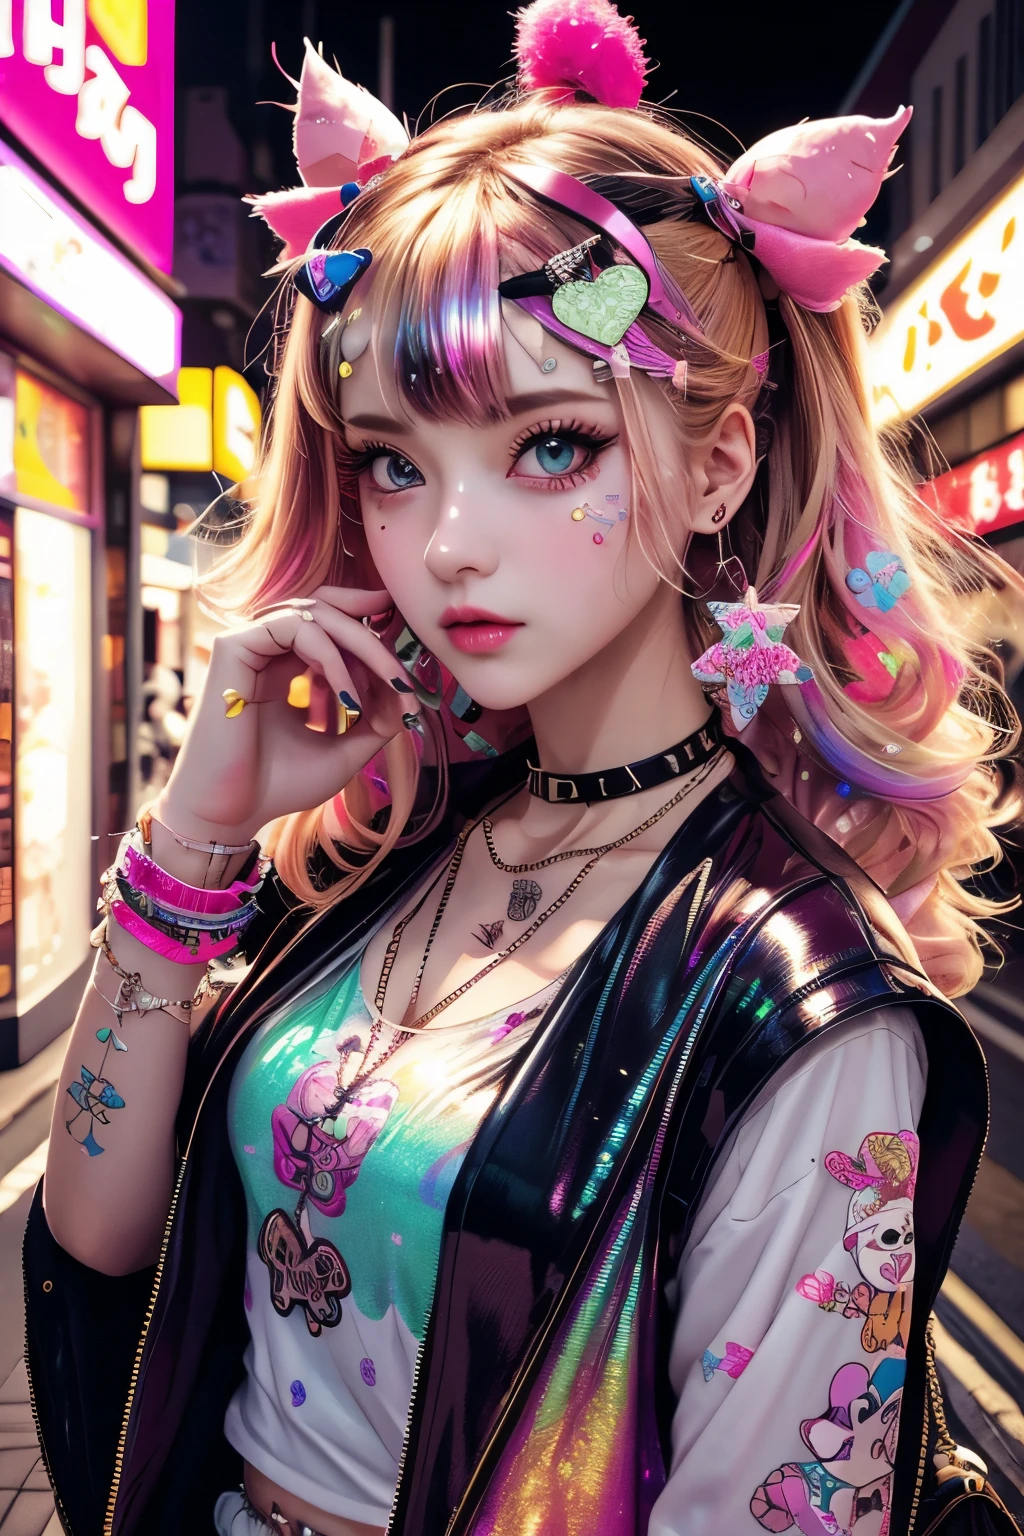 This is a colorful and ornate (masterpiece). Generate a trendy decora woman in the colorful and busy streets of Akihabara, Tokyo. Generate a lovely decora adult woman in the style of Olya Anufrieva on Artstation and Harajuku street fashion. Her clothes are vibrant in the Harajuku style. Include oversized accessories, neon colors, and inventive layering. The woman's clothes and accessories should be highly ornate in the ((((Harajuku decora)))) and decora kei style.  The woman's hair is curly and glossy and styled cutely. The woman's clothes and accessories should be highly ornate in the Harajuku decora and decora kei style. Her eyes are important and stunning, with interesting coloring and patterns. ((((iridescence and shimmer)))), glitter, best eyes, best quality, cyberpunk kei, visual kei, selfie, bold colors and patterns, LED lights, ((glowing neon signs)), ((ultra detailed)), dynamic composition, (((decora)))